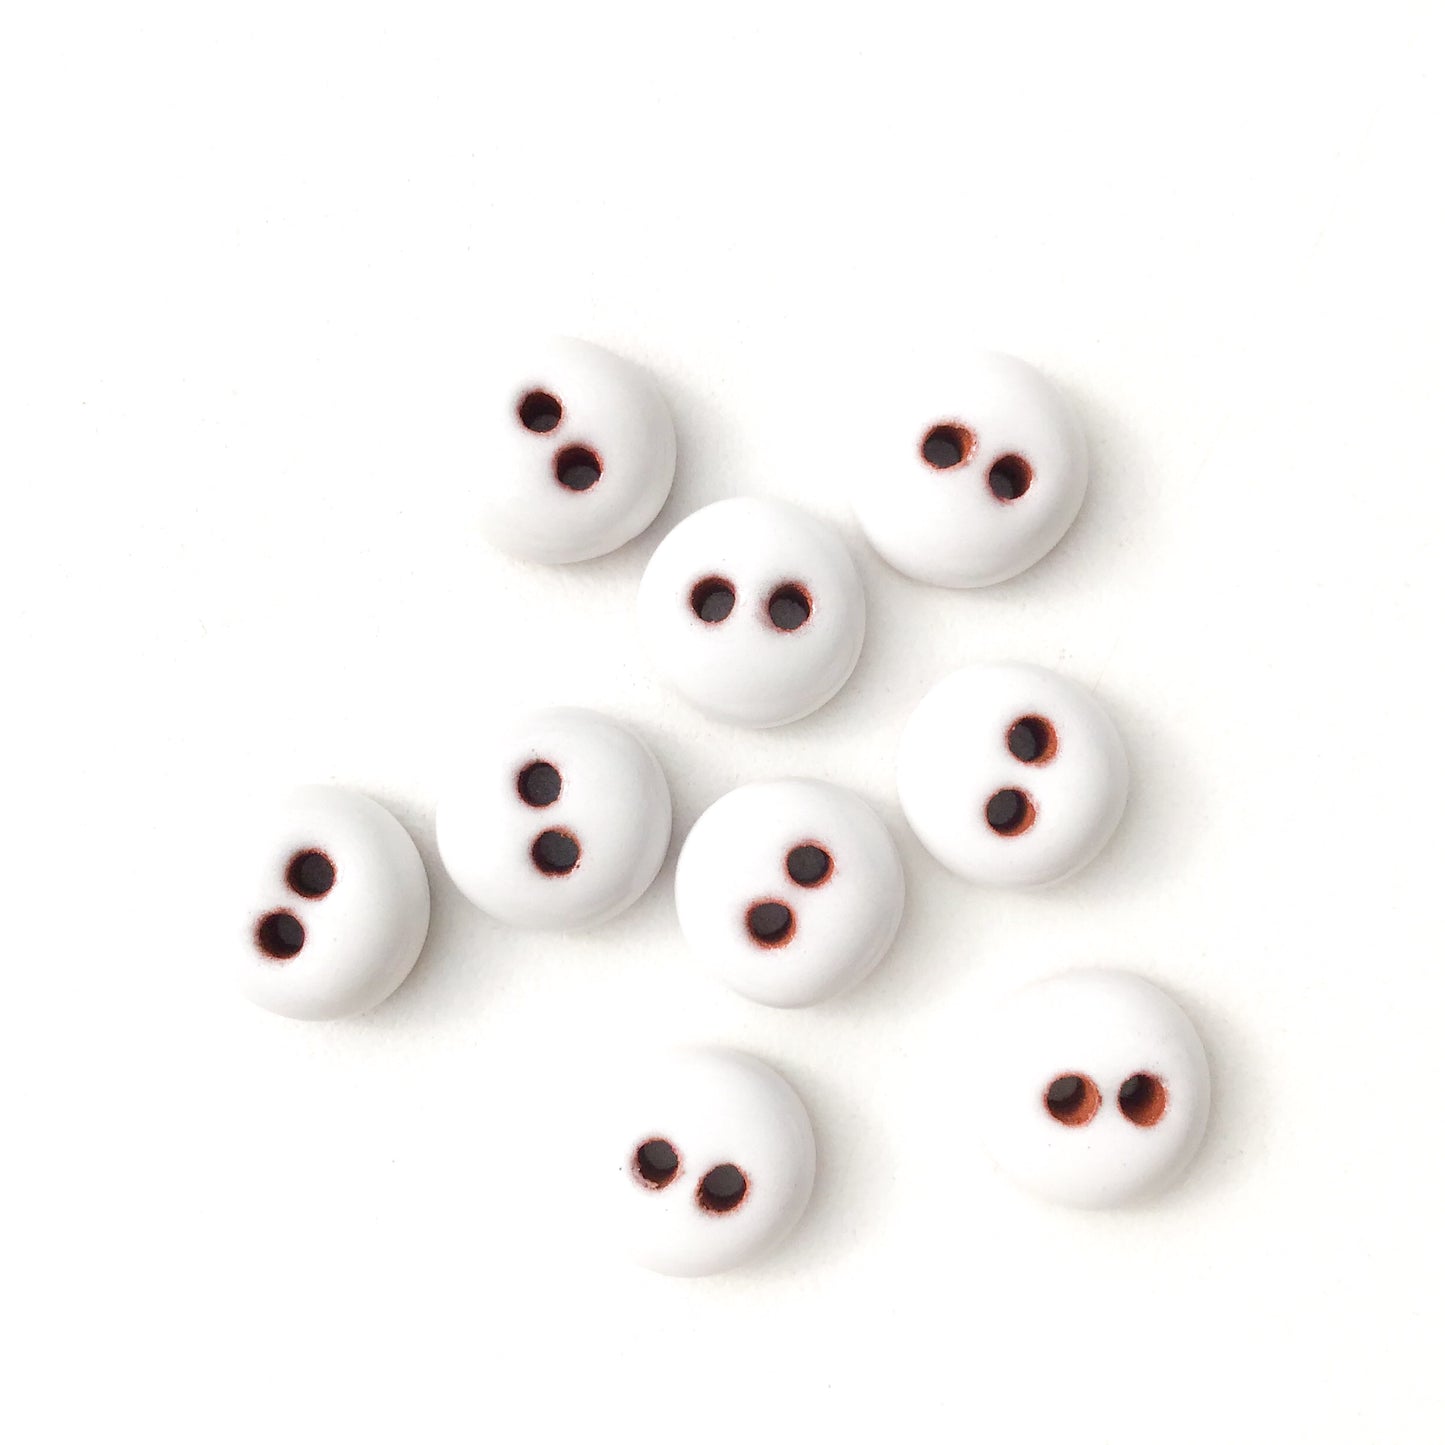 White Ceramic Buttons - Hand Made Clay Buttons - 7/16" - 9 Pack